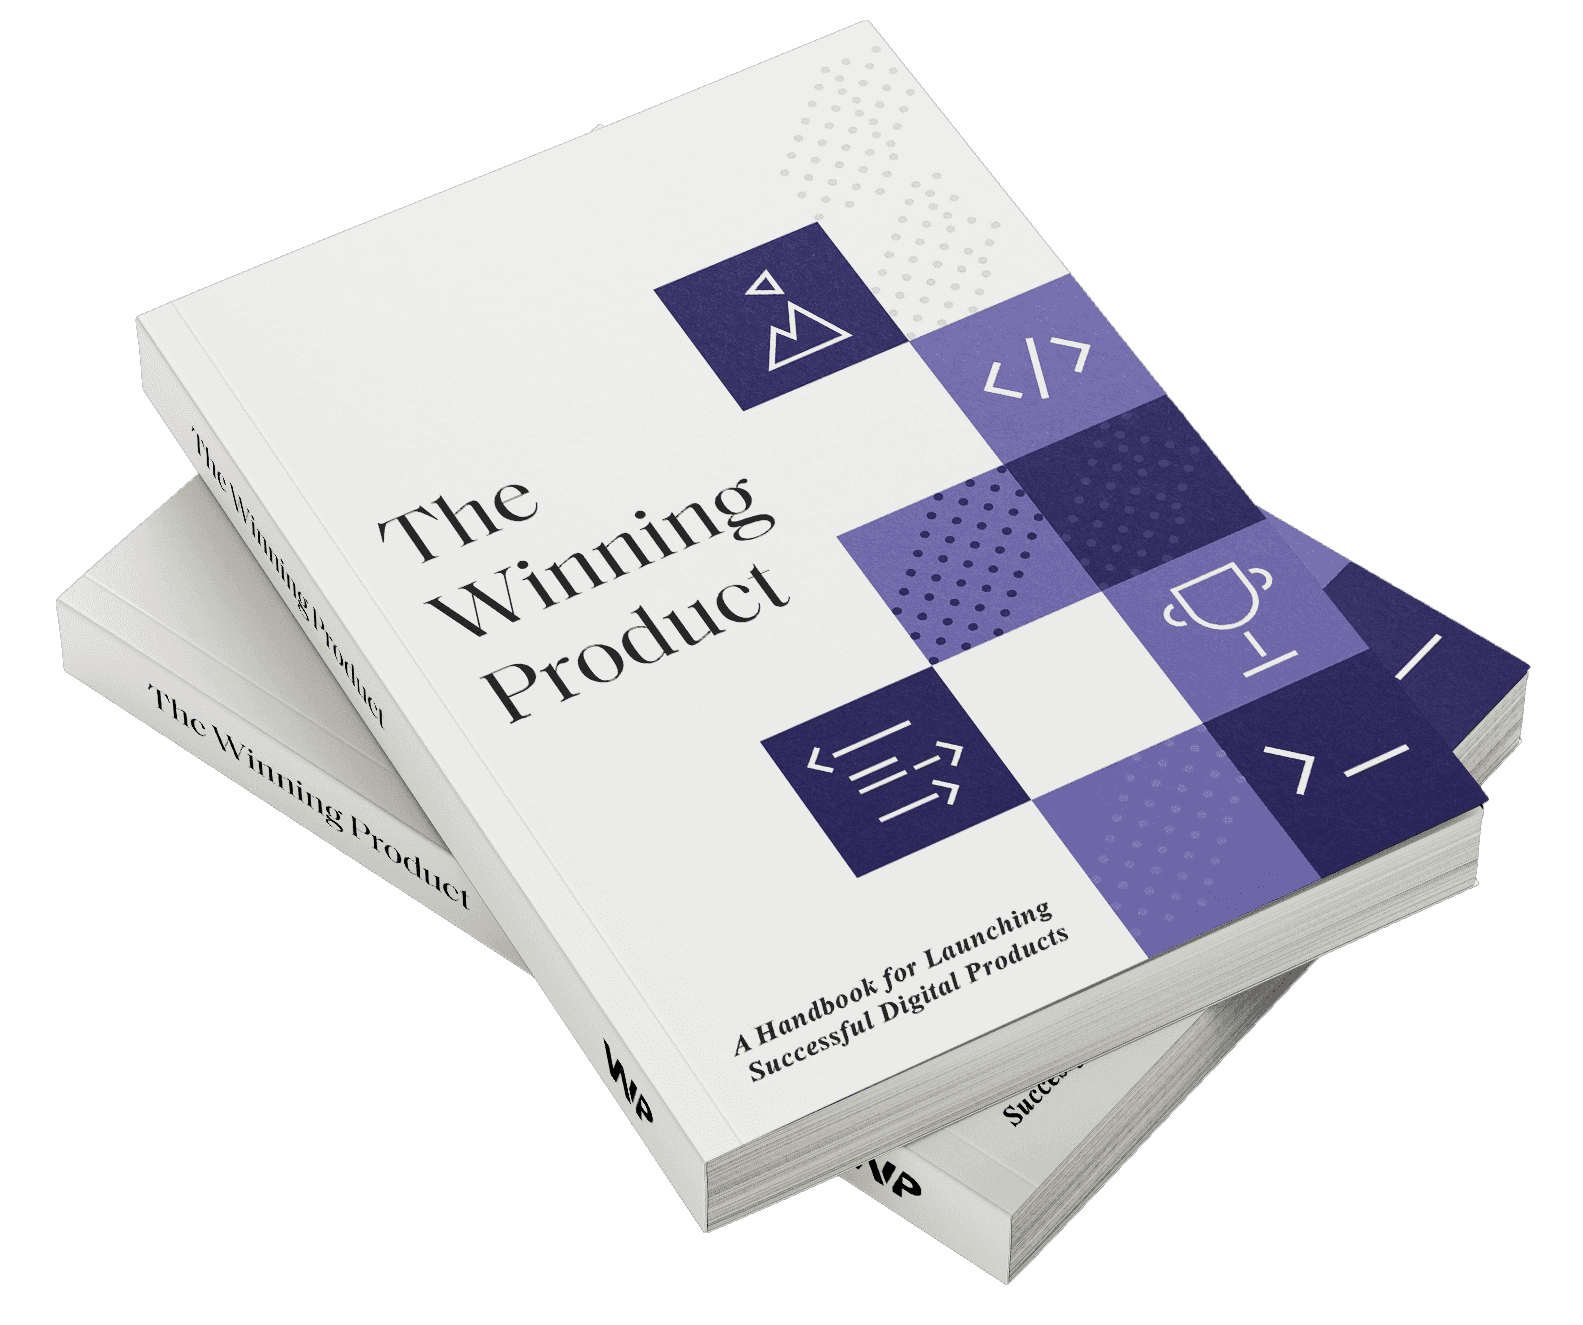 The Winning Product: A handbook for launching successful digital products